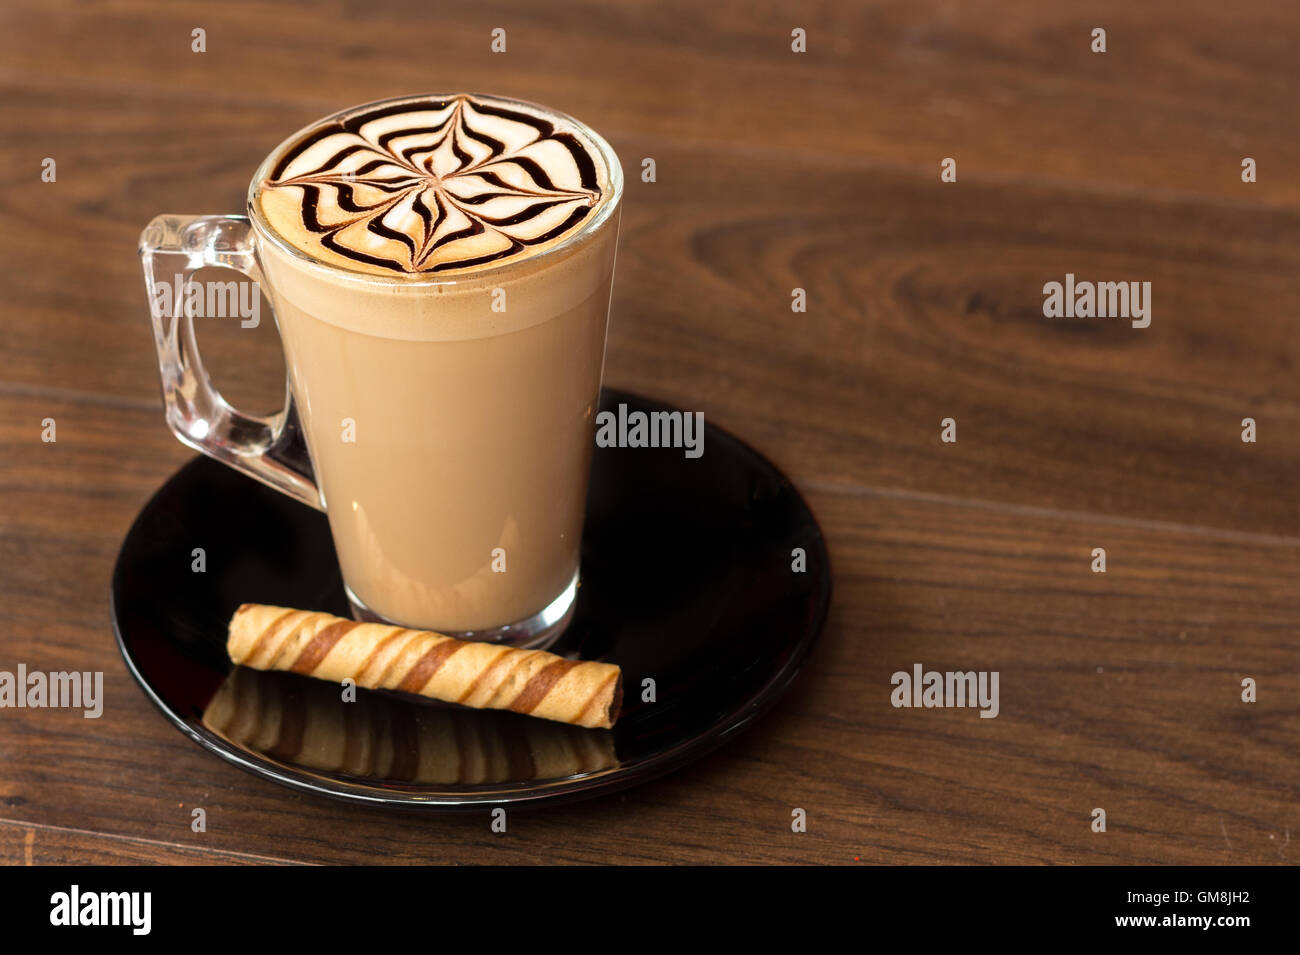 A Latte with some simple latte art on a wood background Stock Photo